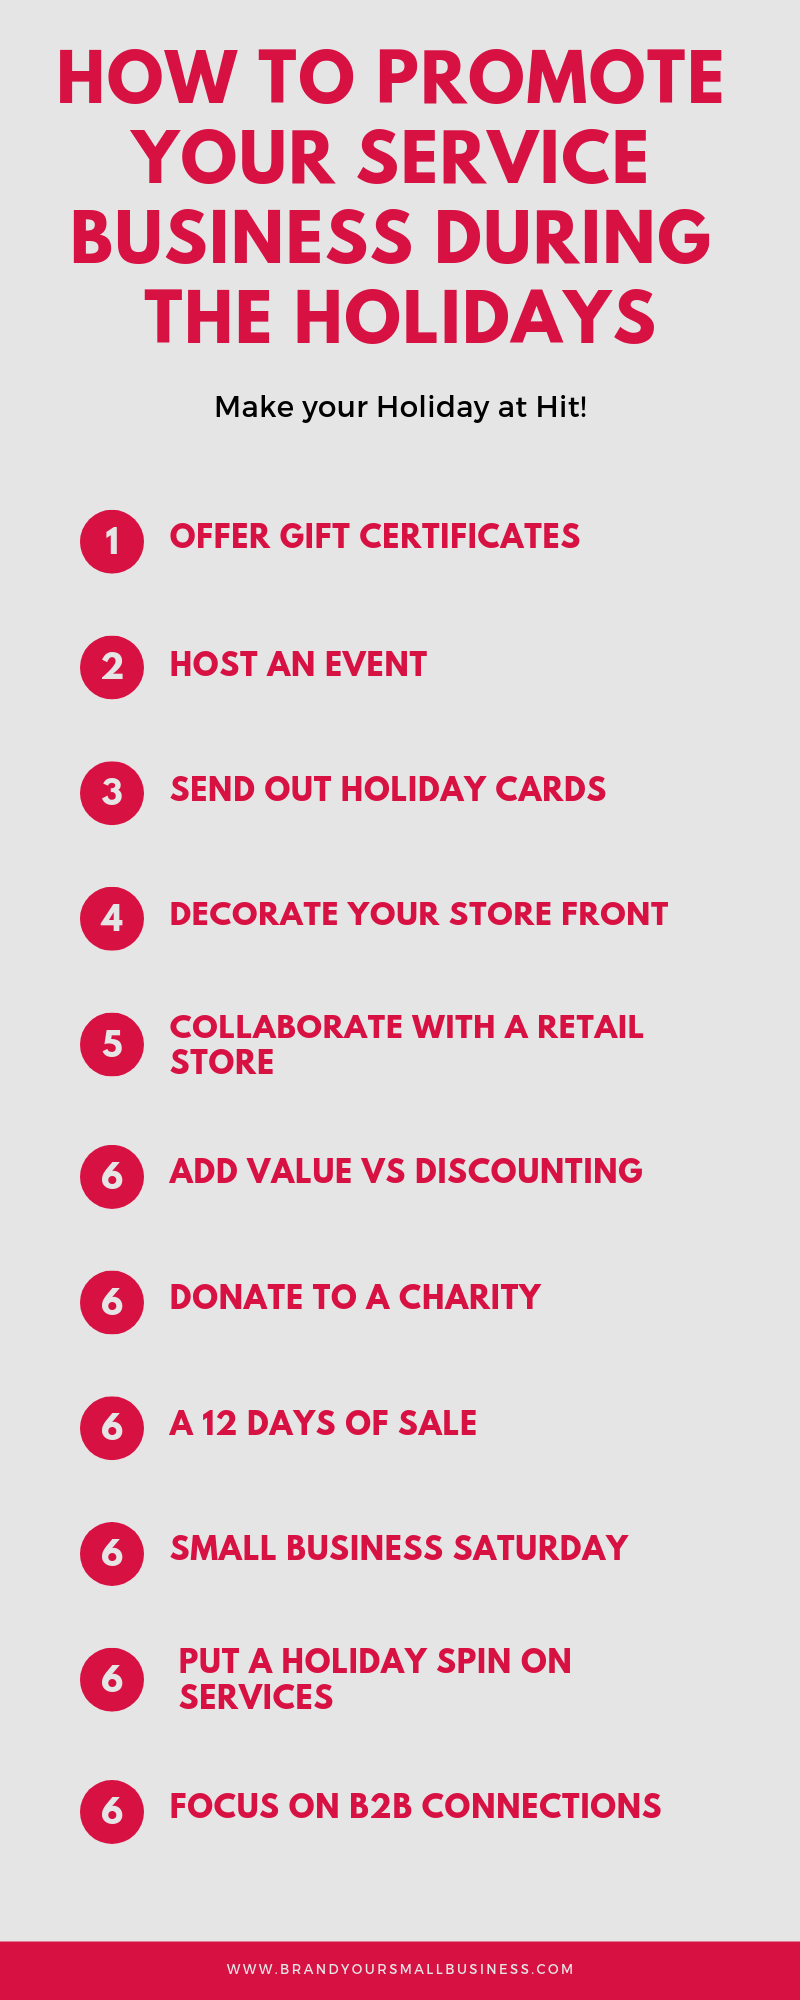 How to promote your Service Business in the Holidays